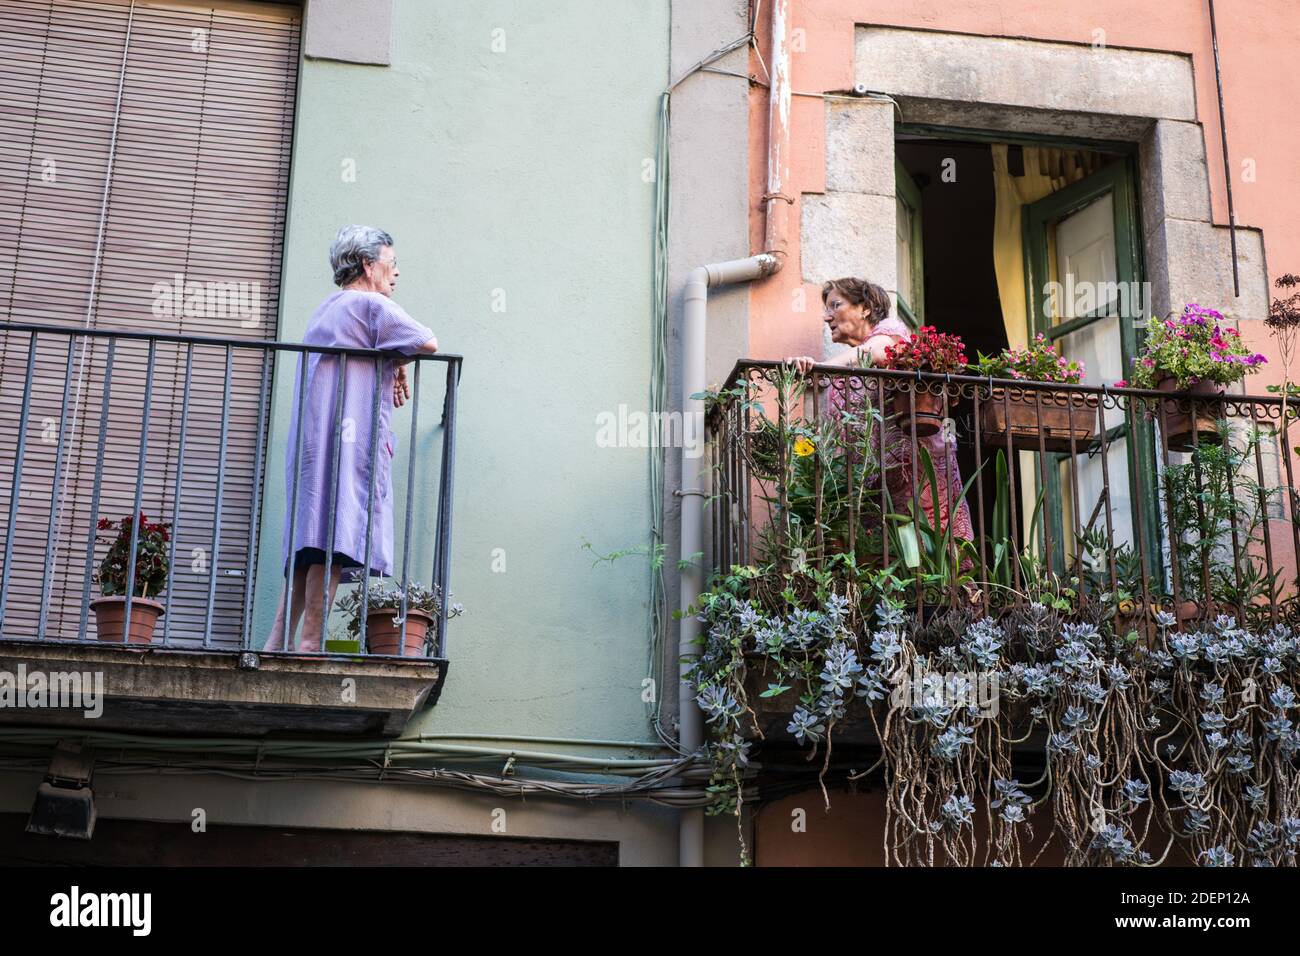 Local people on the balcony in the Girona, Catalonia, Spain, Europe. Stock Photo